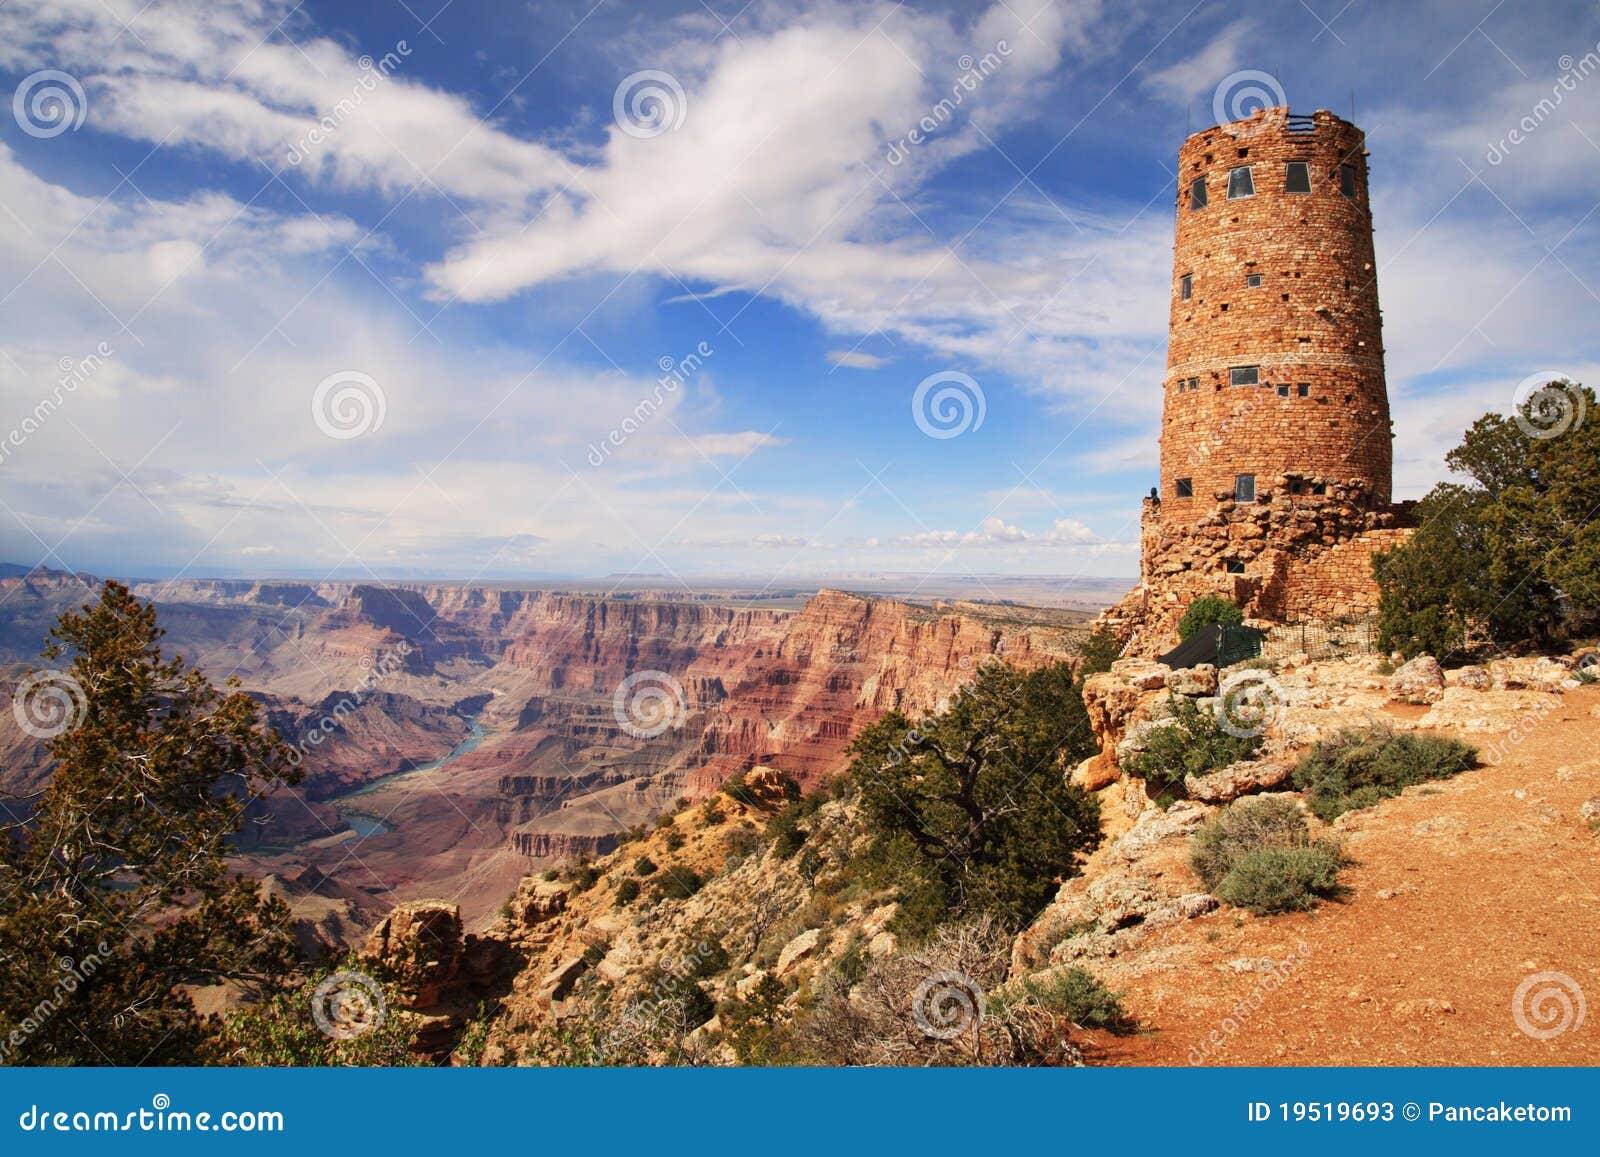 grand canyon watchtower